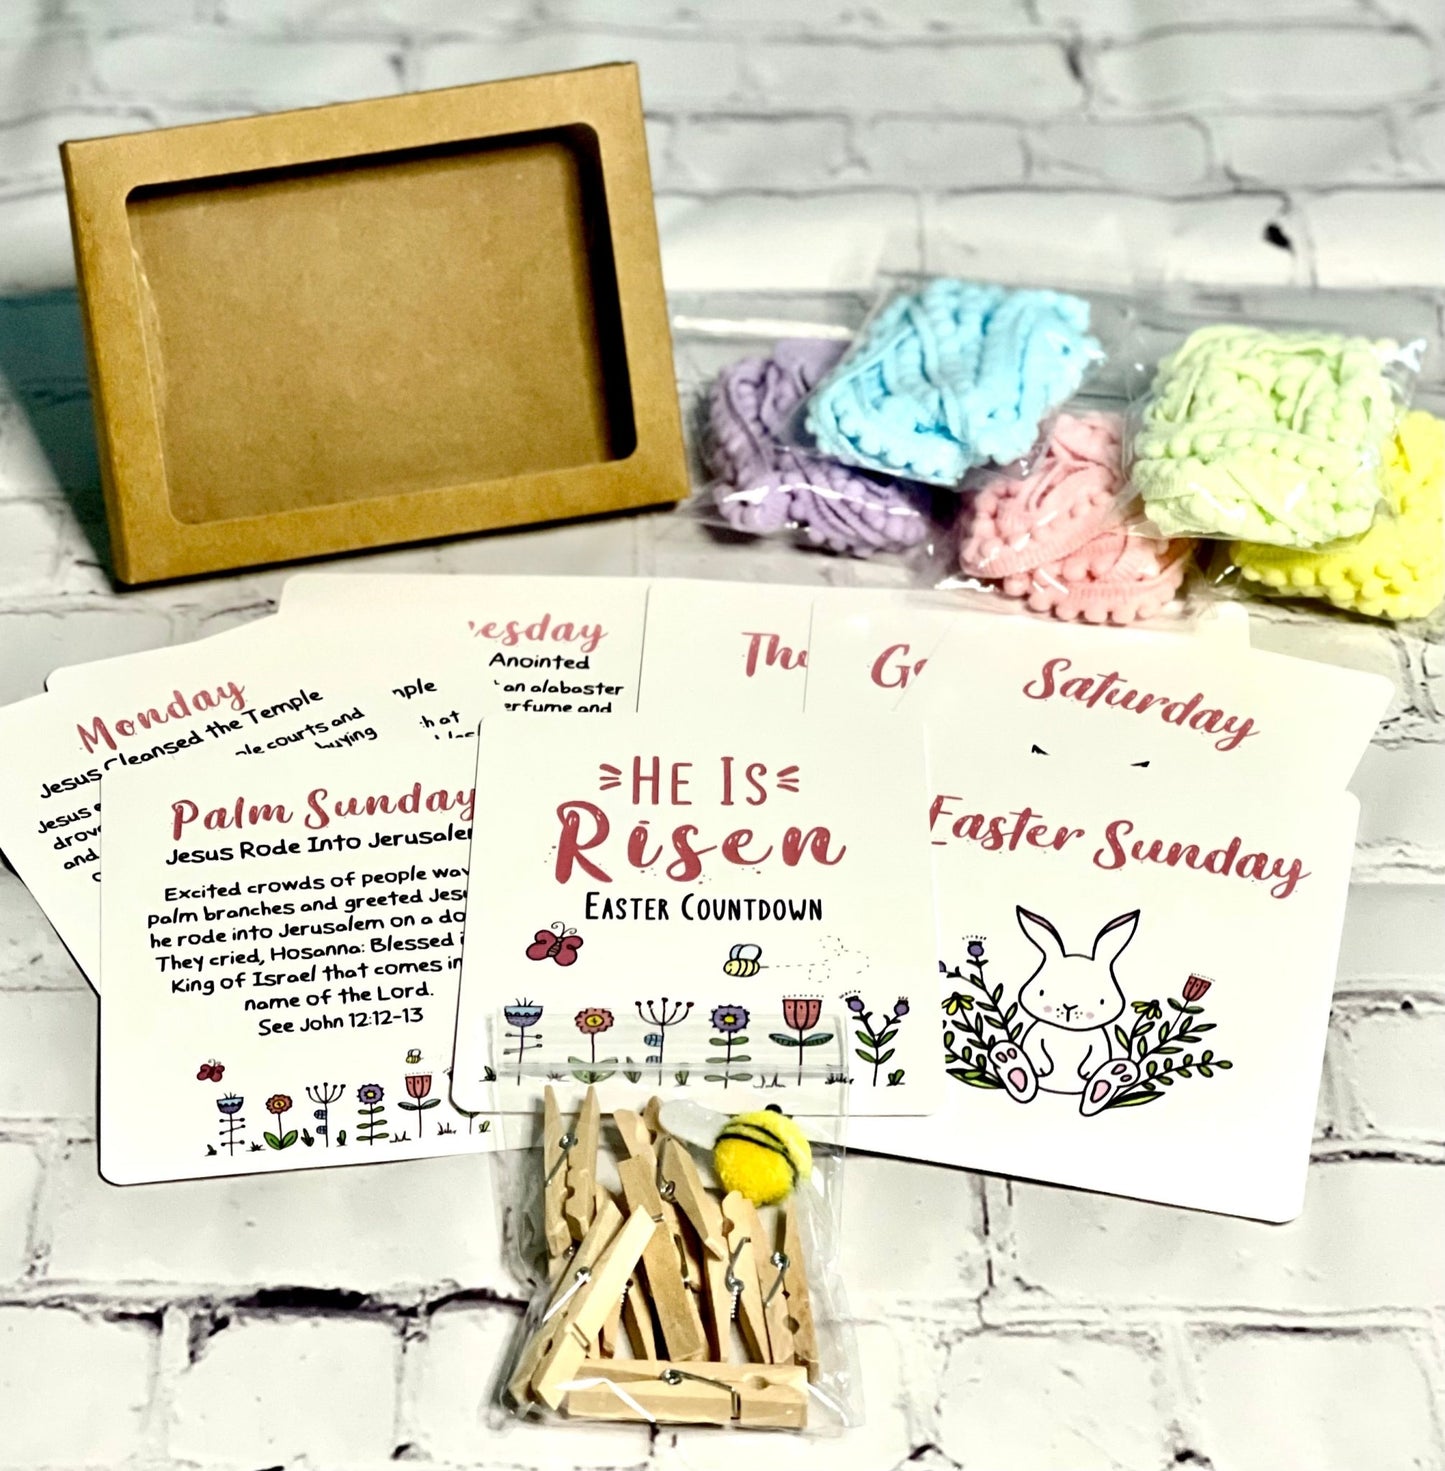 HE IS RISEN EASTER COUNTDOWN BOXED SET (includes 9 premium cards, Pom Pom trim, clothespins, and fuzzy bumblebee)